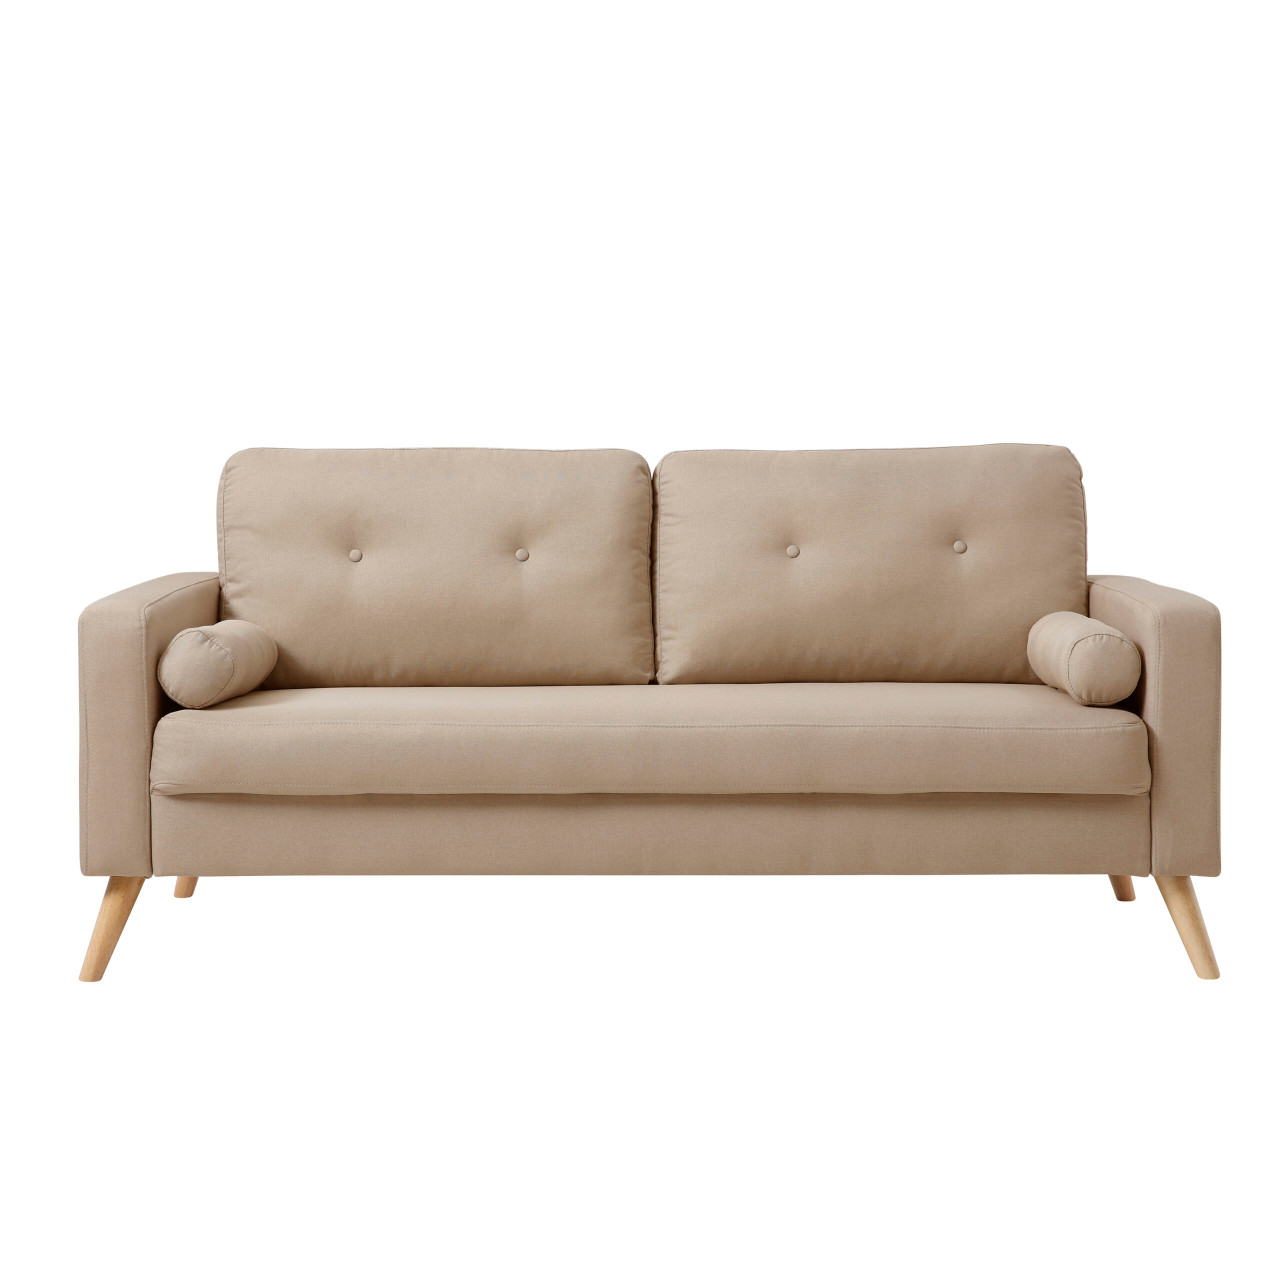 The Alvin Beige Mid Century Modern Sofa at Furniture Express